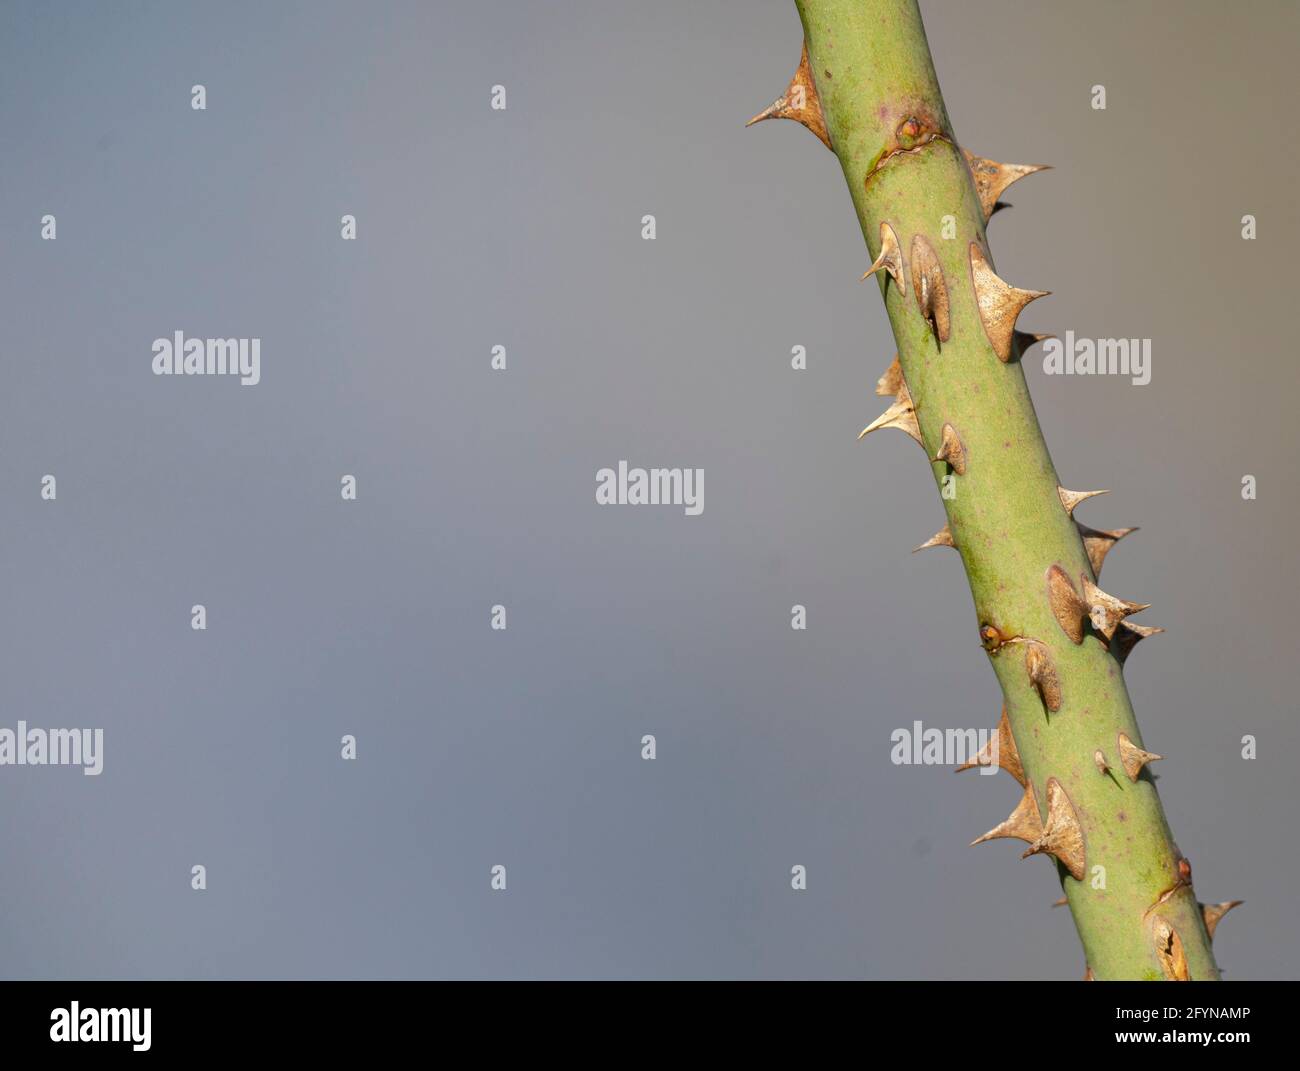 Isolated detail of a plant stem with sharp thorns and a blurred background Stock Photo